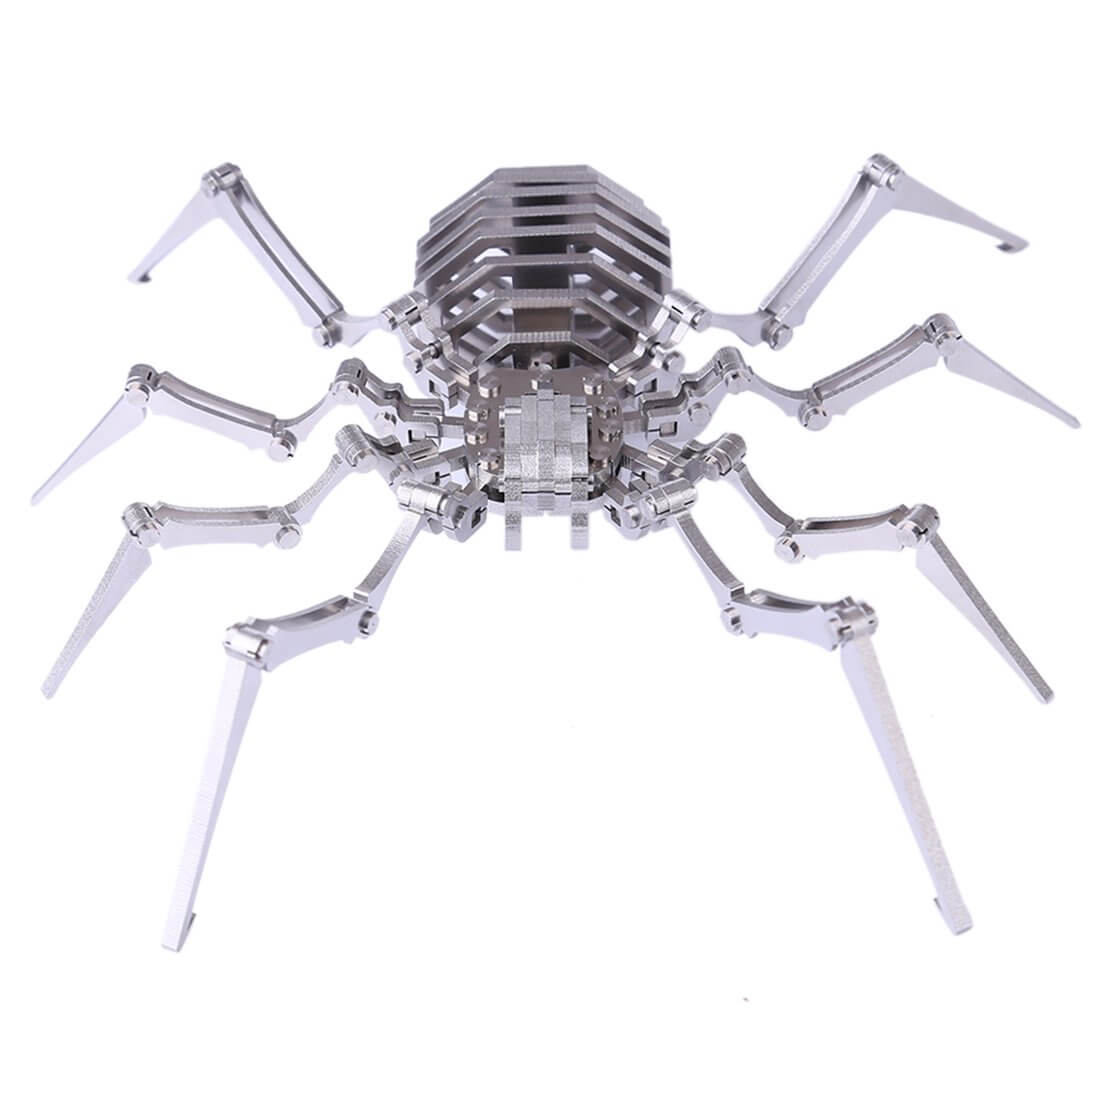 2pcs Little Scorpion & Spider King DIY Stainless Steel Metal Puzzle Model